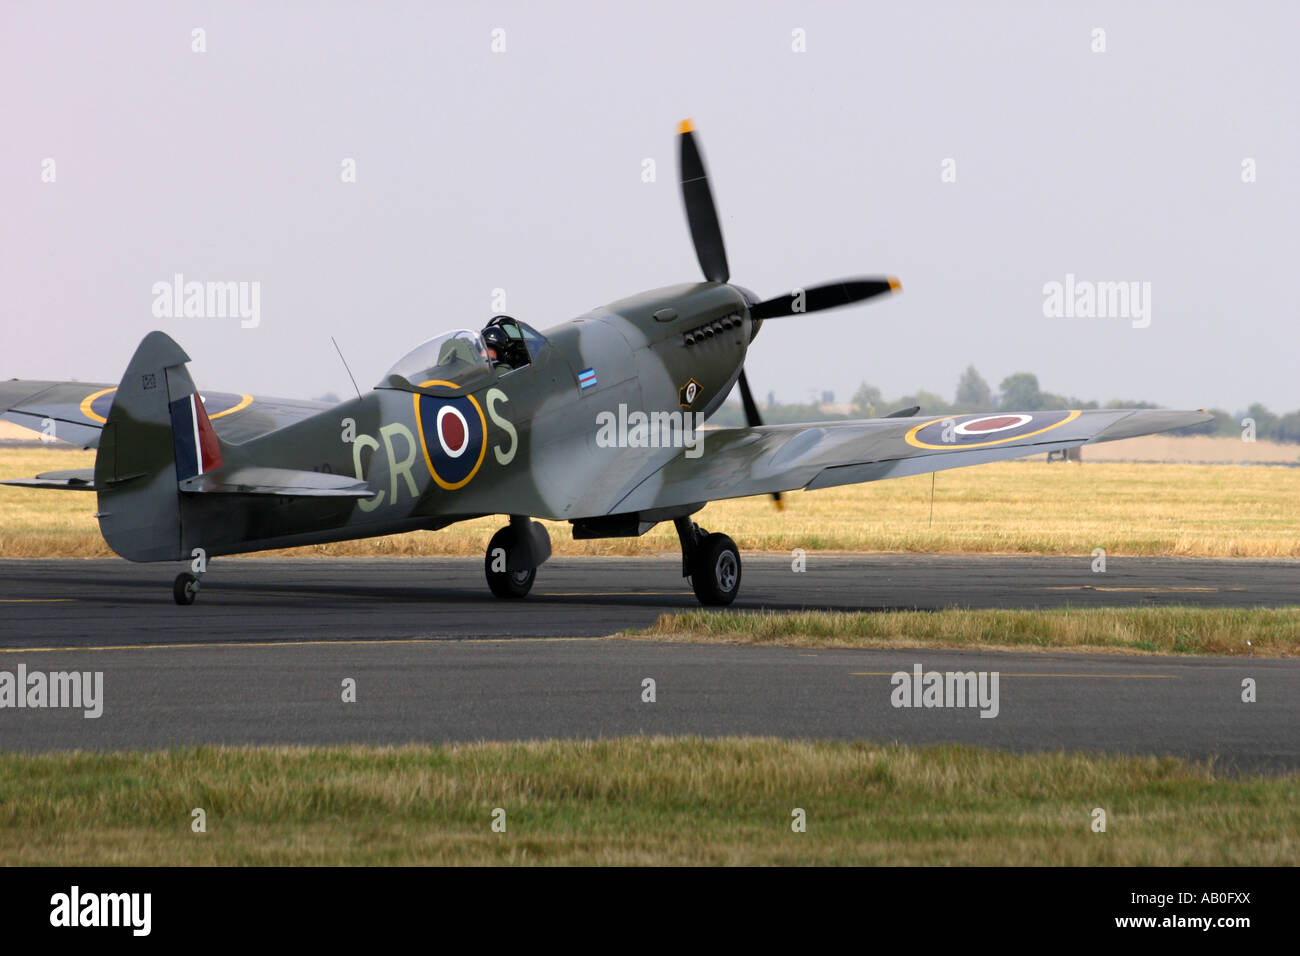 Royal Air Force Spitfire Fighter Stock Photo